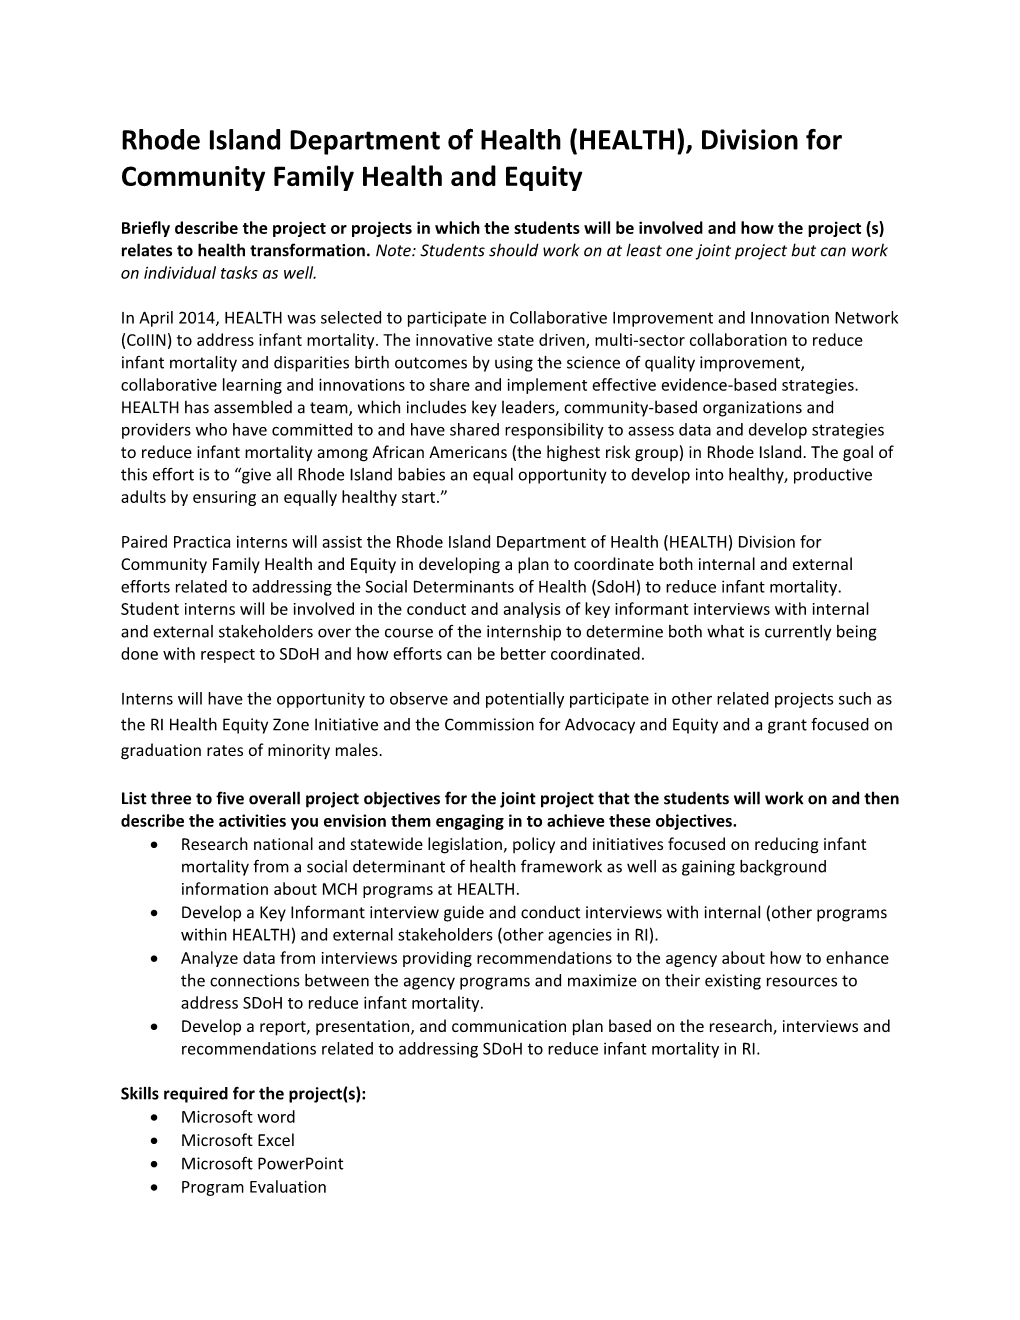 Rhode Island Department of Health (HEALTH), Division for Community Family Health and Equity